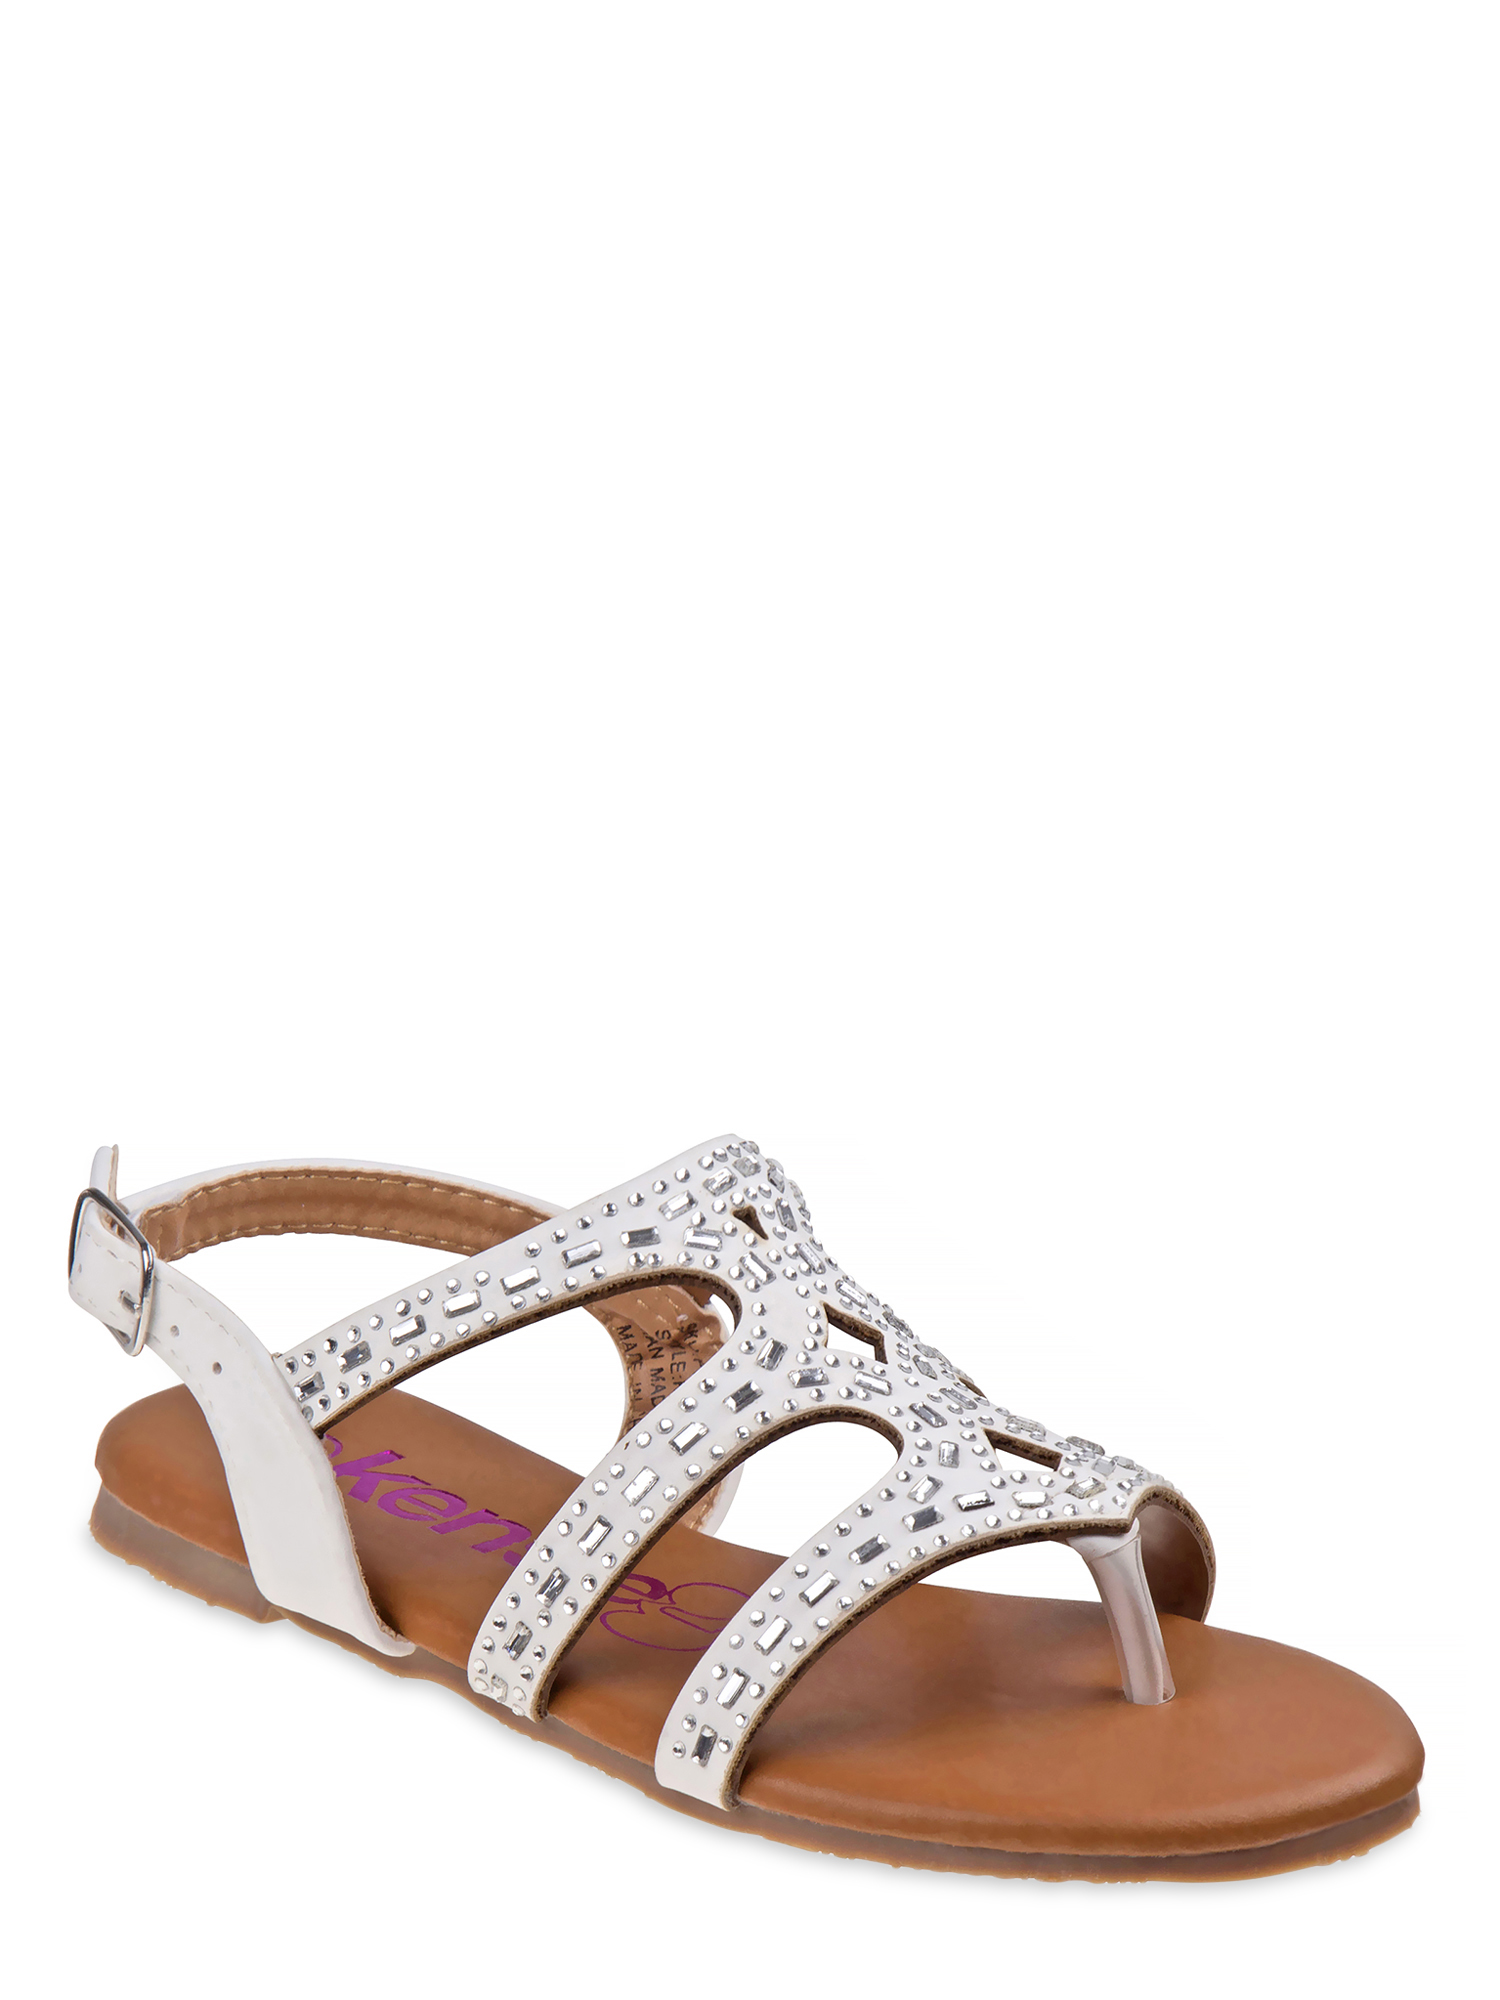 Kensie Girl open-toe Glitter Stud Encrusted Strappy Sandals - image 1 of 5